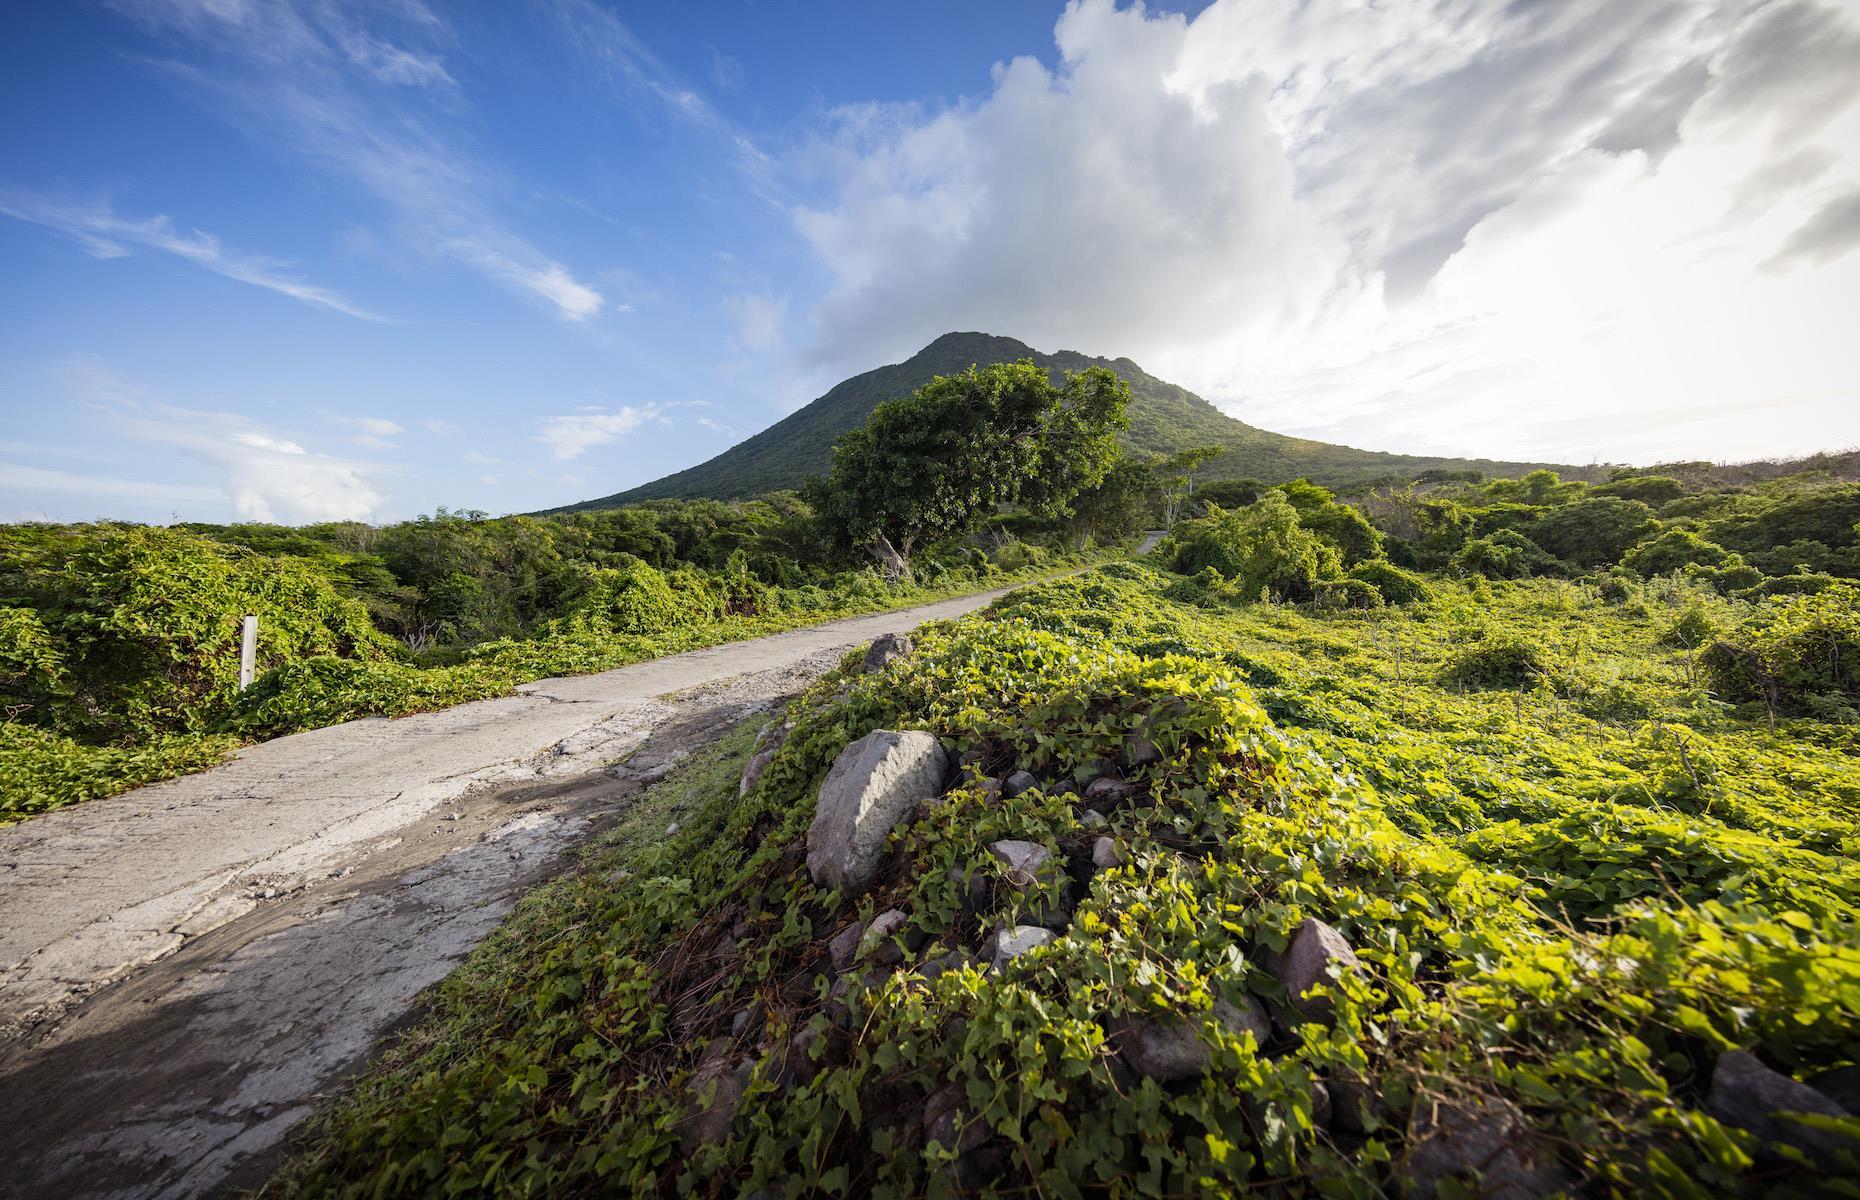 <p>Those who have discovered this little jewel don’t like to share it. Sint Eustatius in the Dutch Caribbean – known locally as Statia – is just six-miles (10km) long and three-miles (5km) wide, with a population of just over 3,000. It’s dominated by the Quill, a dormant volcano that looms over the isle, and is a favorite with hikers. The walk up the peak, which rises to around 2,000 feet (601m), and the descent into its semi-tropical rainforest-filled crater, is nothing short of spectacular.</p>